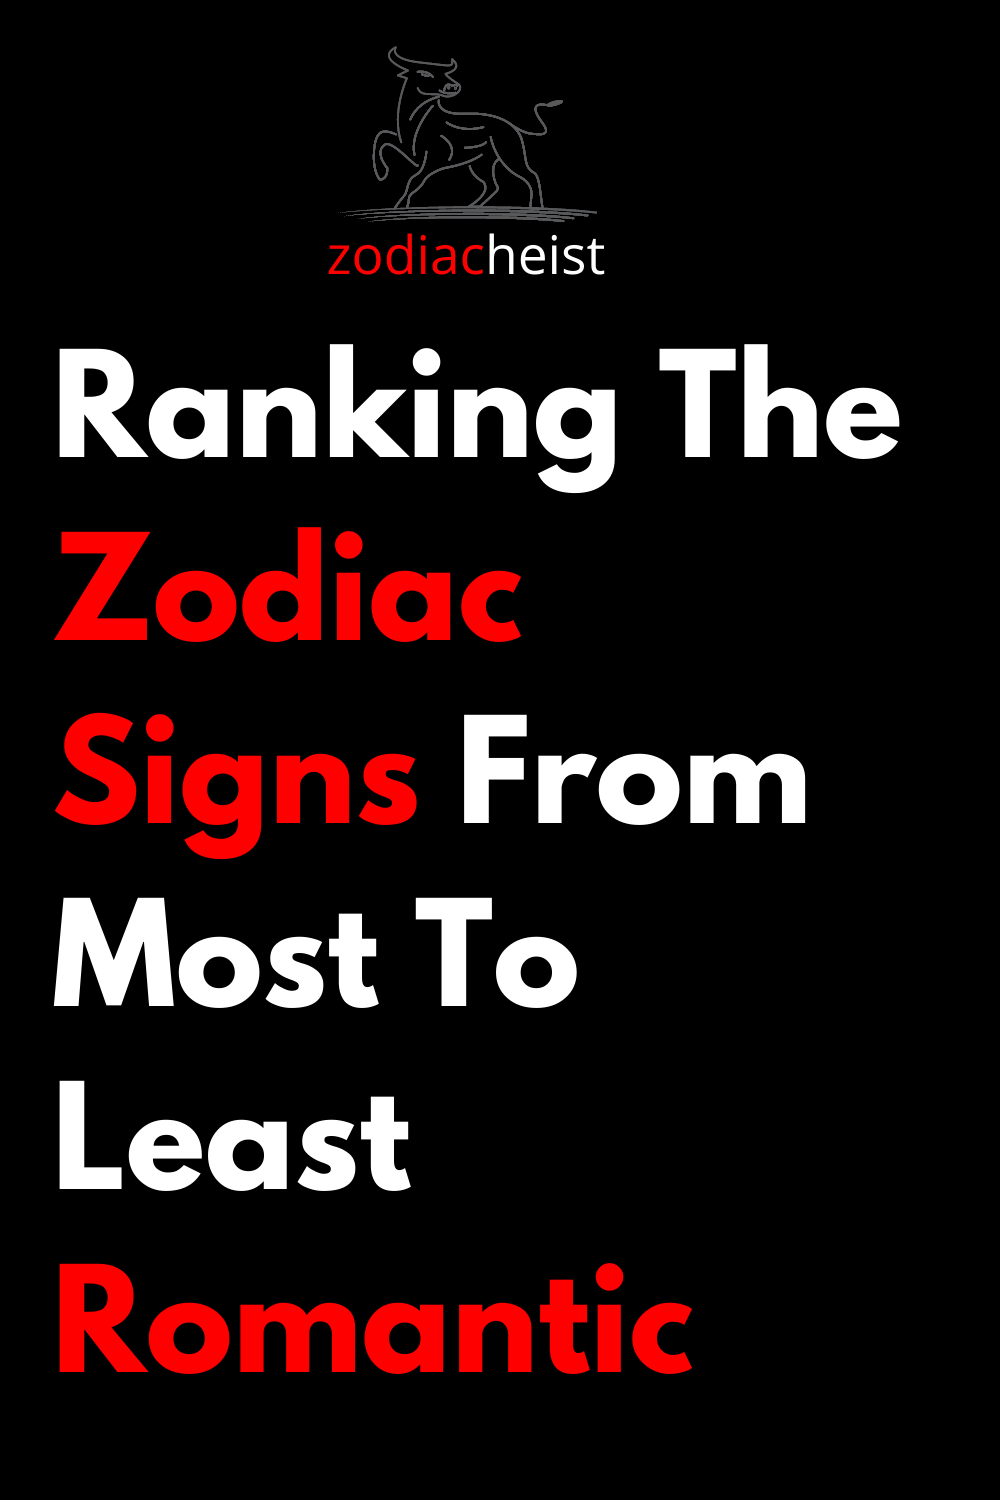 Ranking The Zodiac Signs From Most To Least Romantic